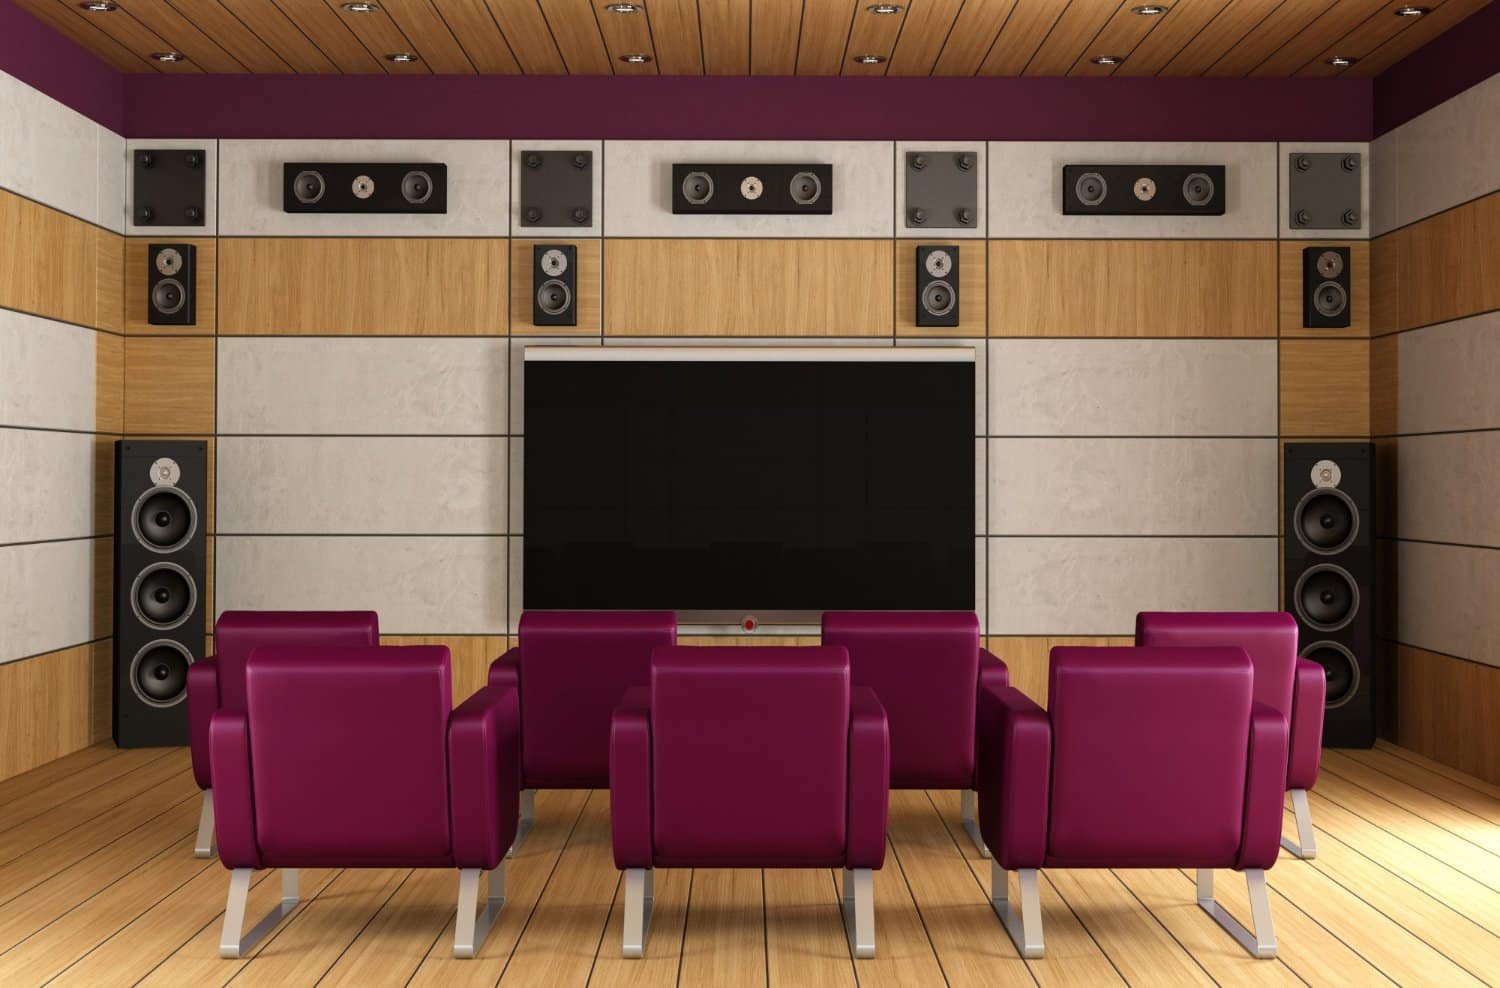 The Impact of Dolby Atmos on Home Theater Audio